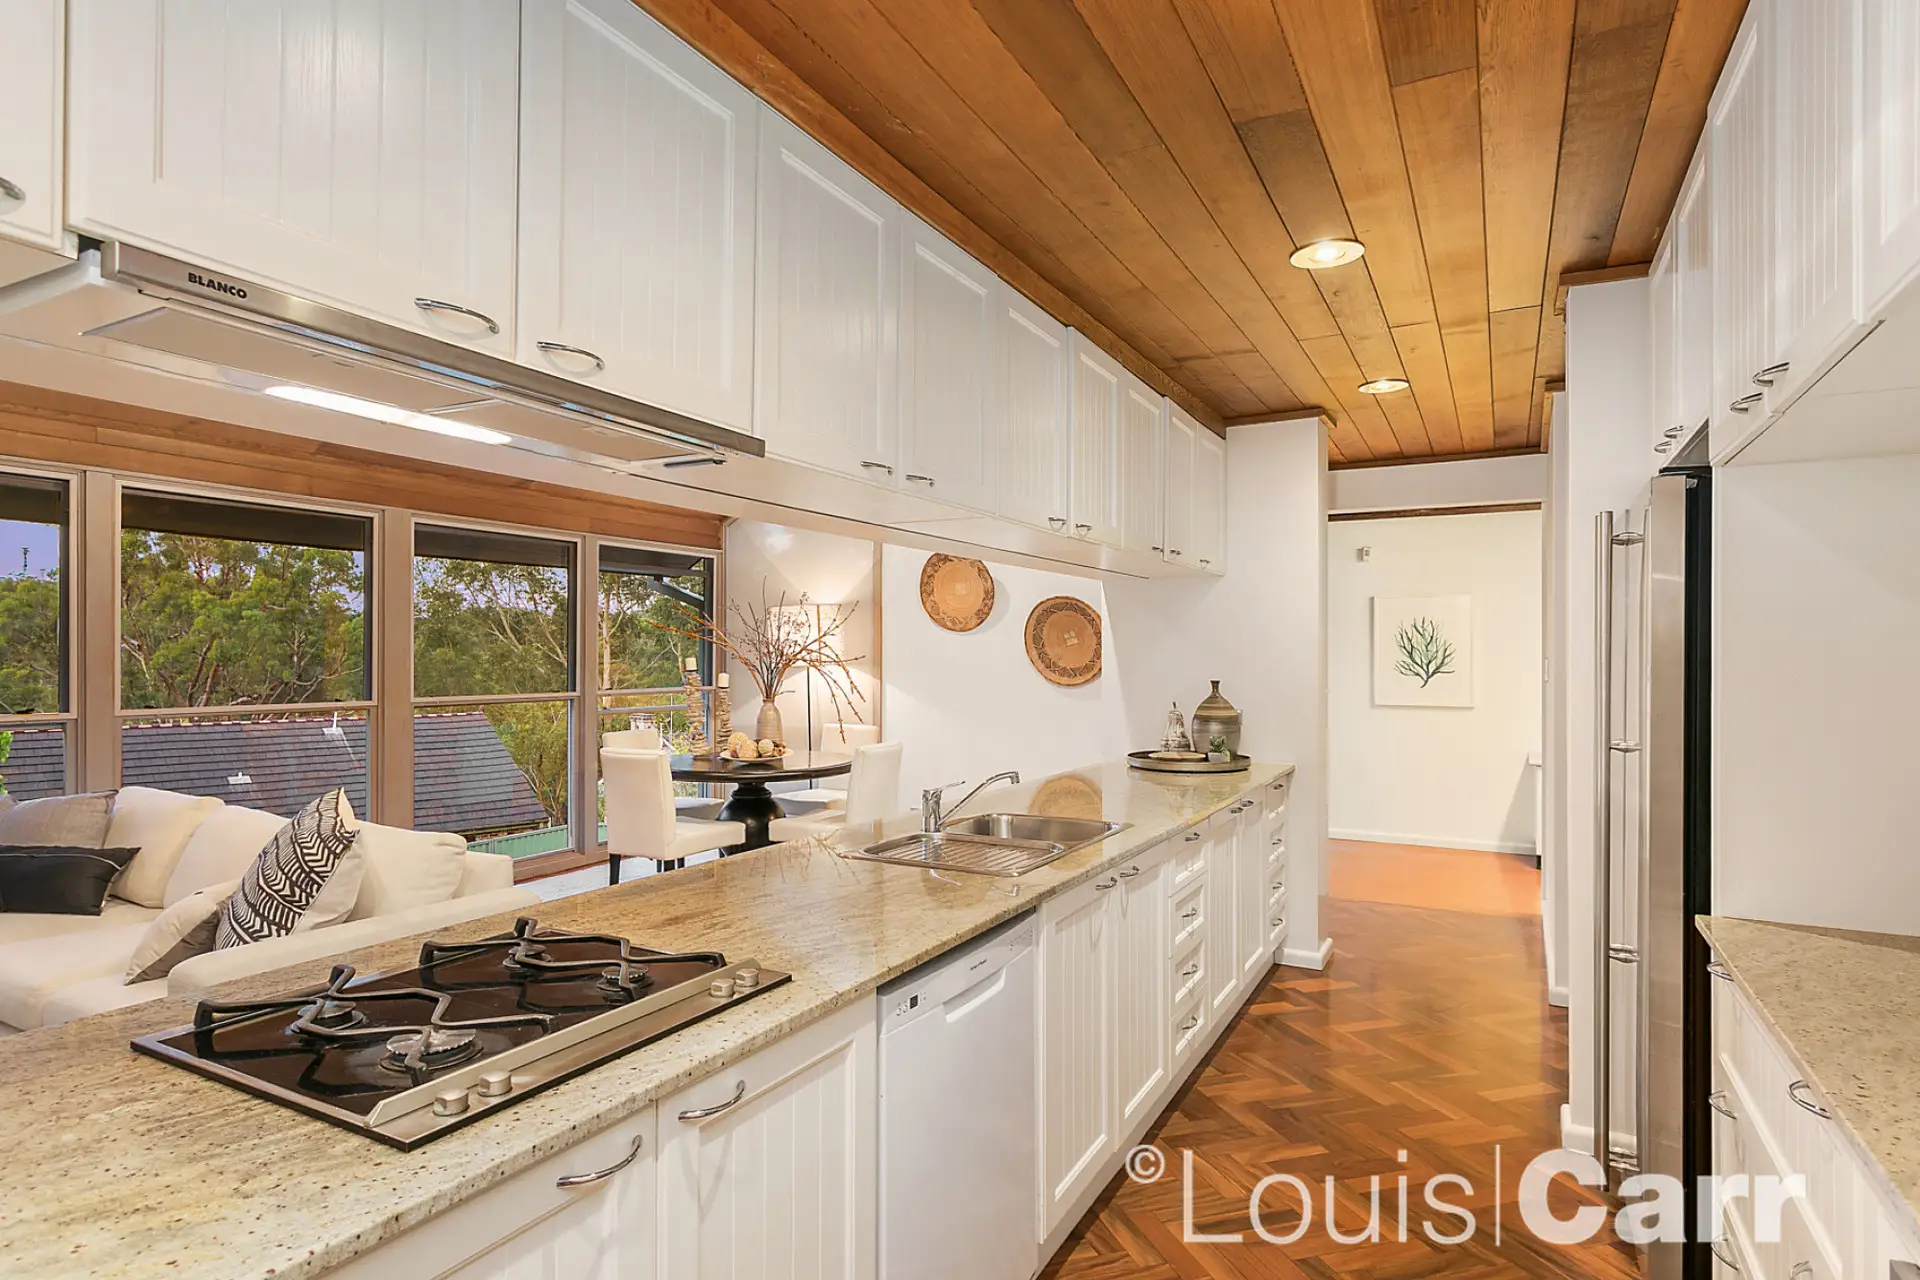 Photo #9: 8 Keith Court, Cherrybrook - Sold by Louis Carr Real Estate